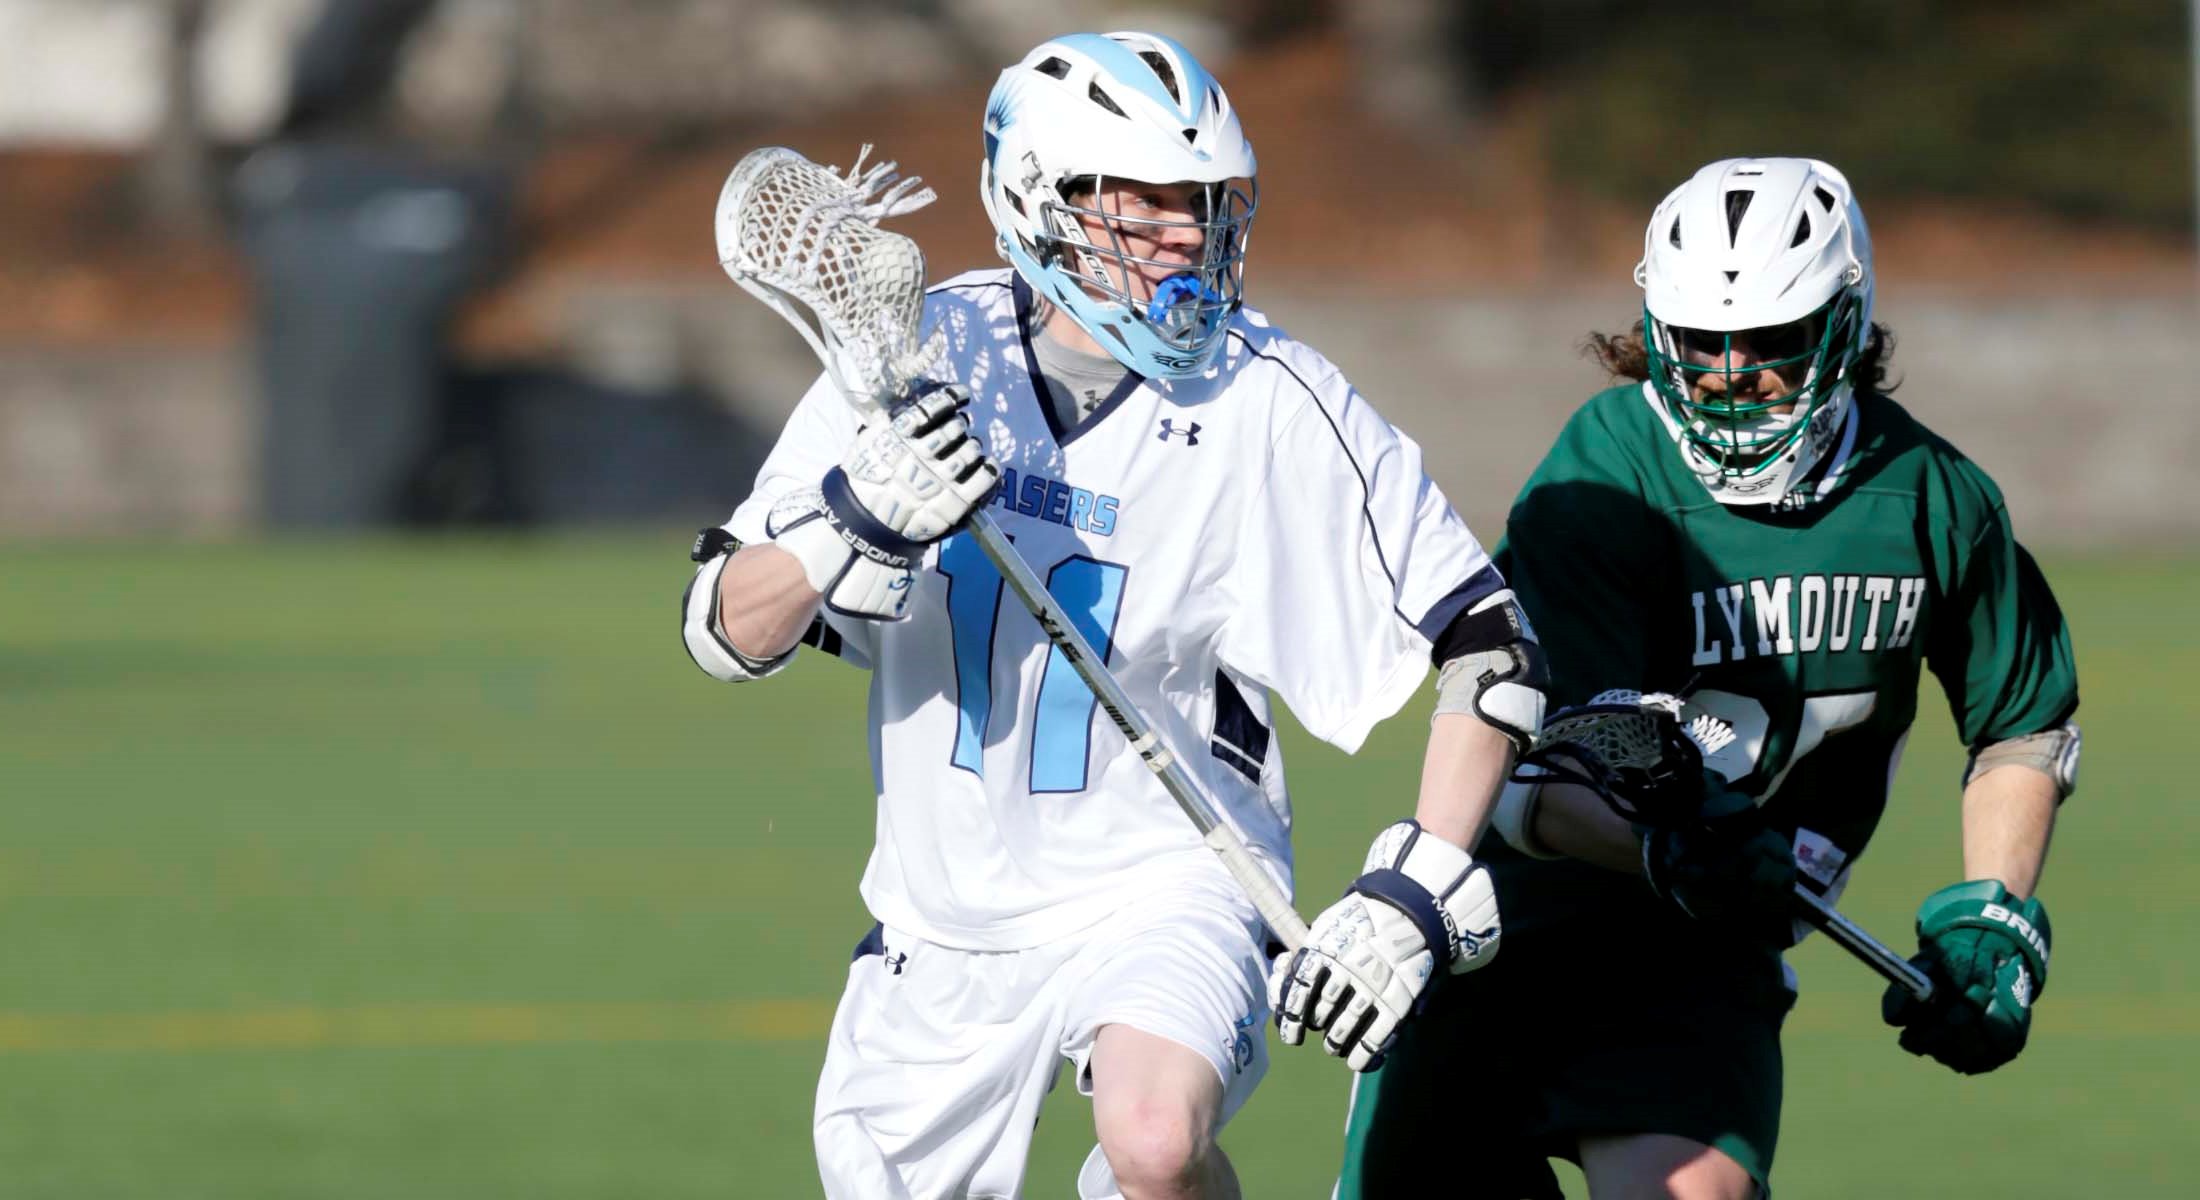 Lasell Wins Fourth Straight, 11-7 over Becker in Men’s Lacrosse